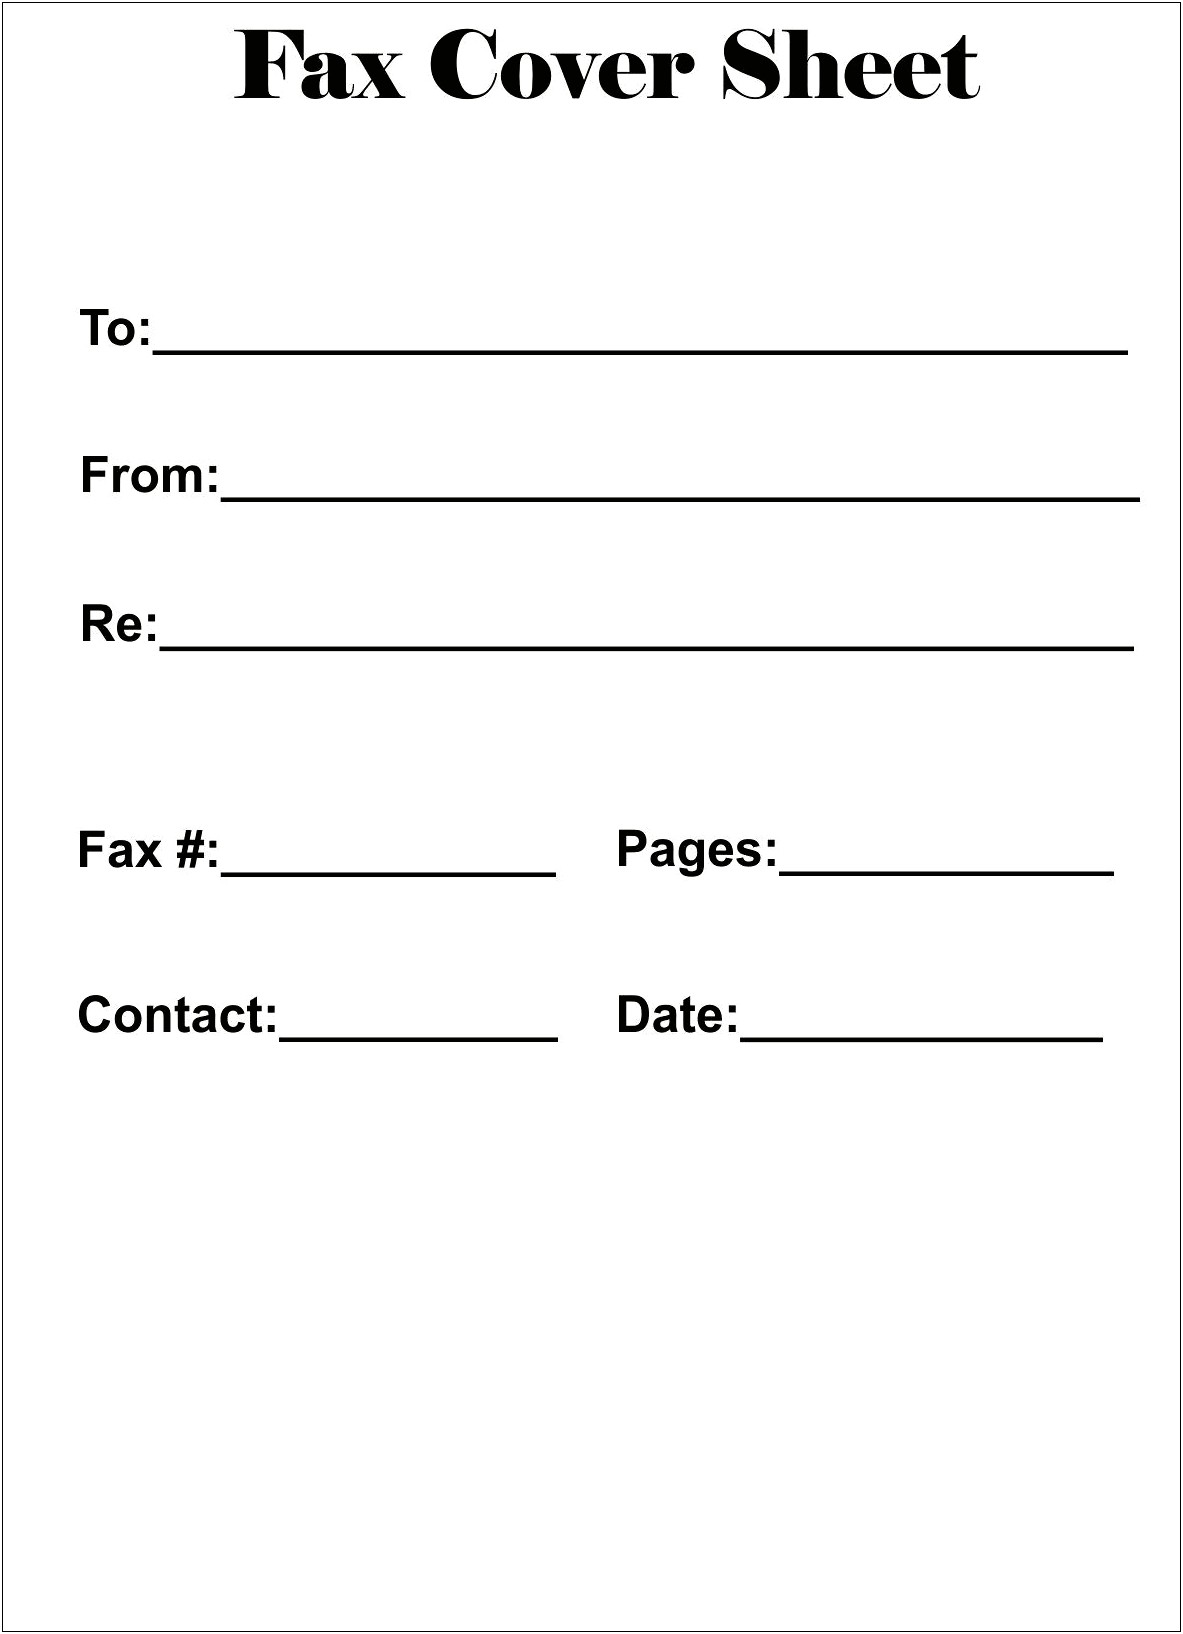 Free Downloadable Fax Cover Sheet Template